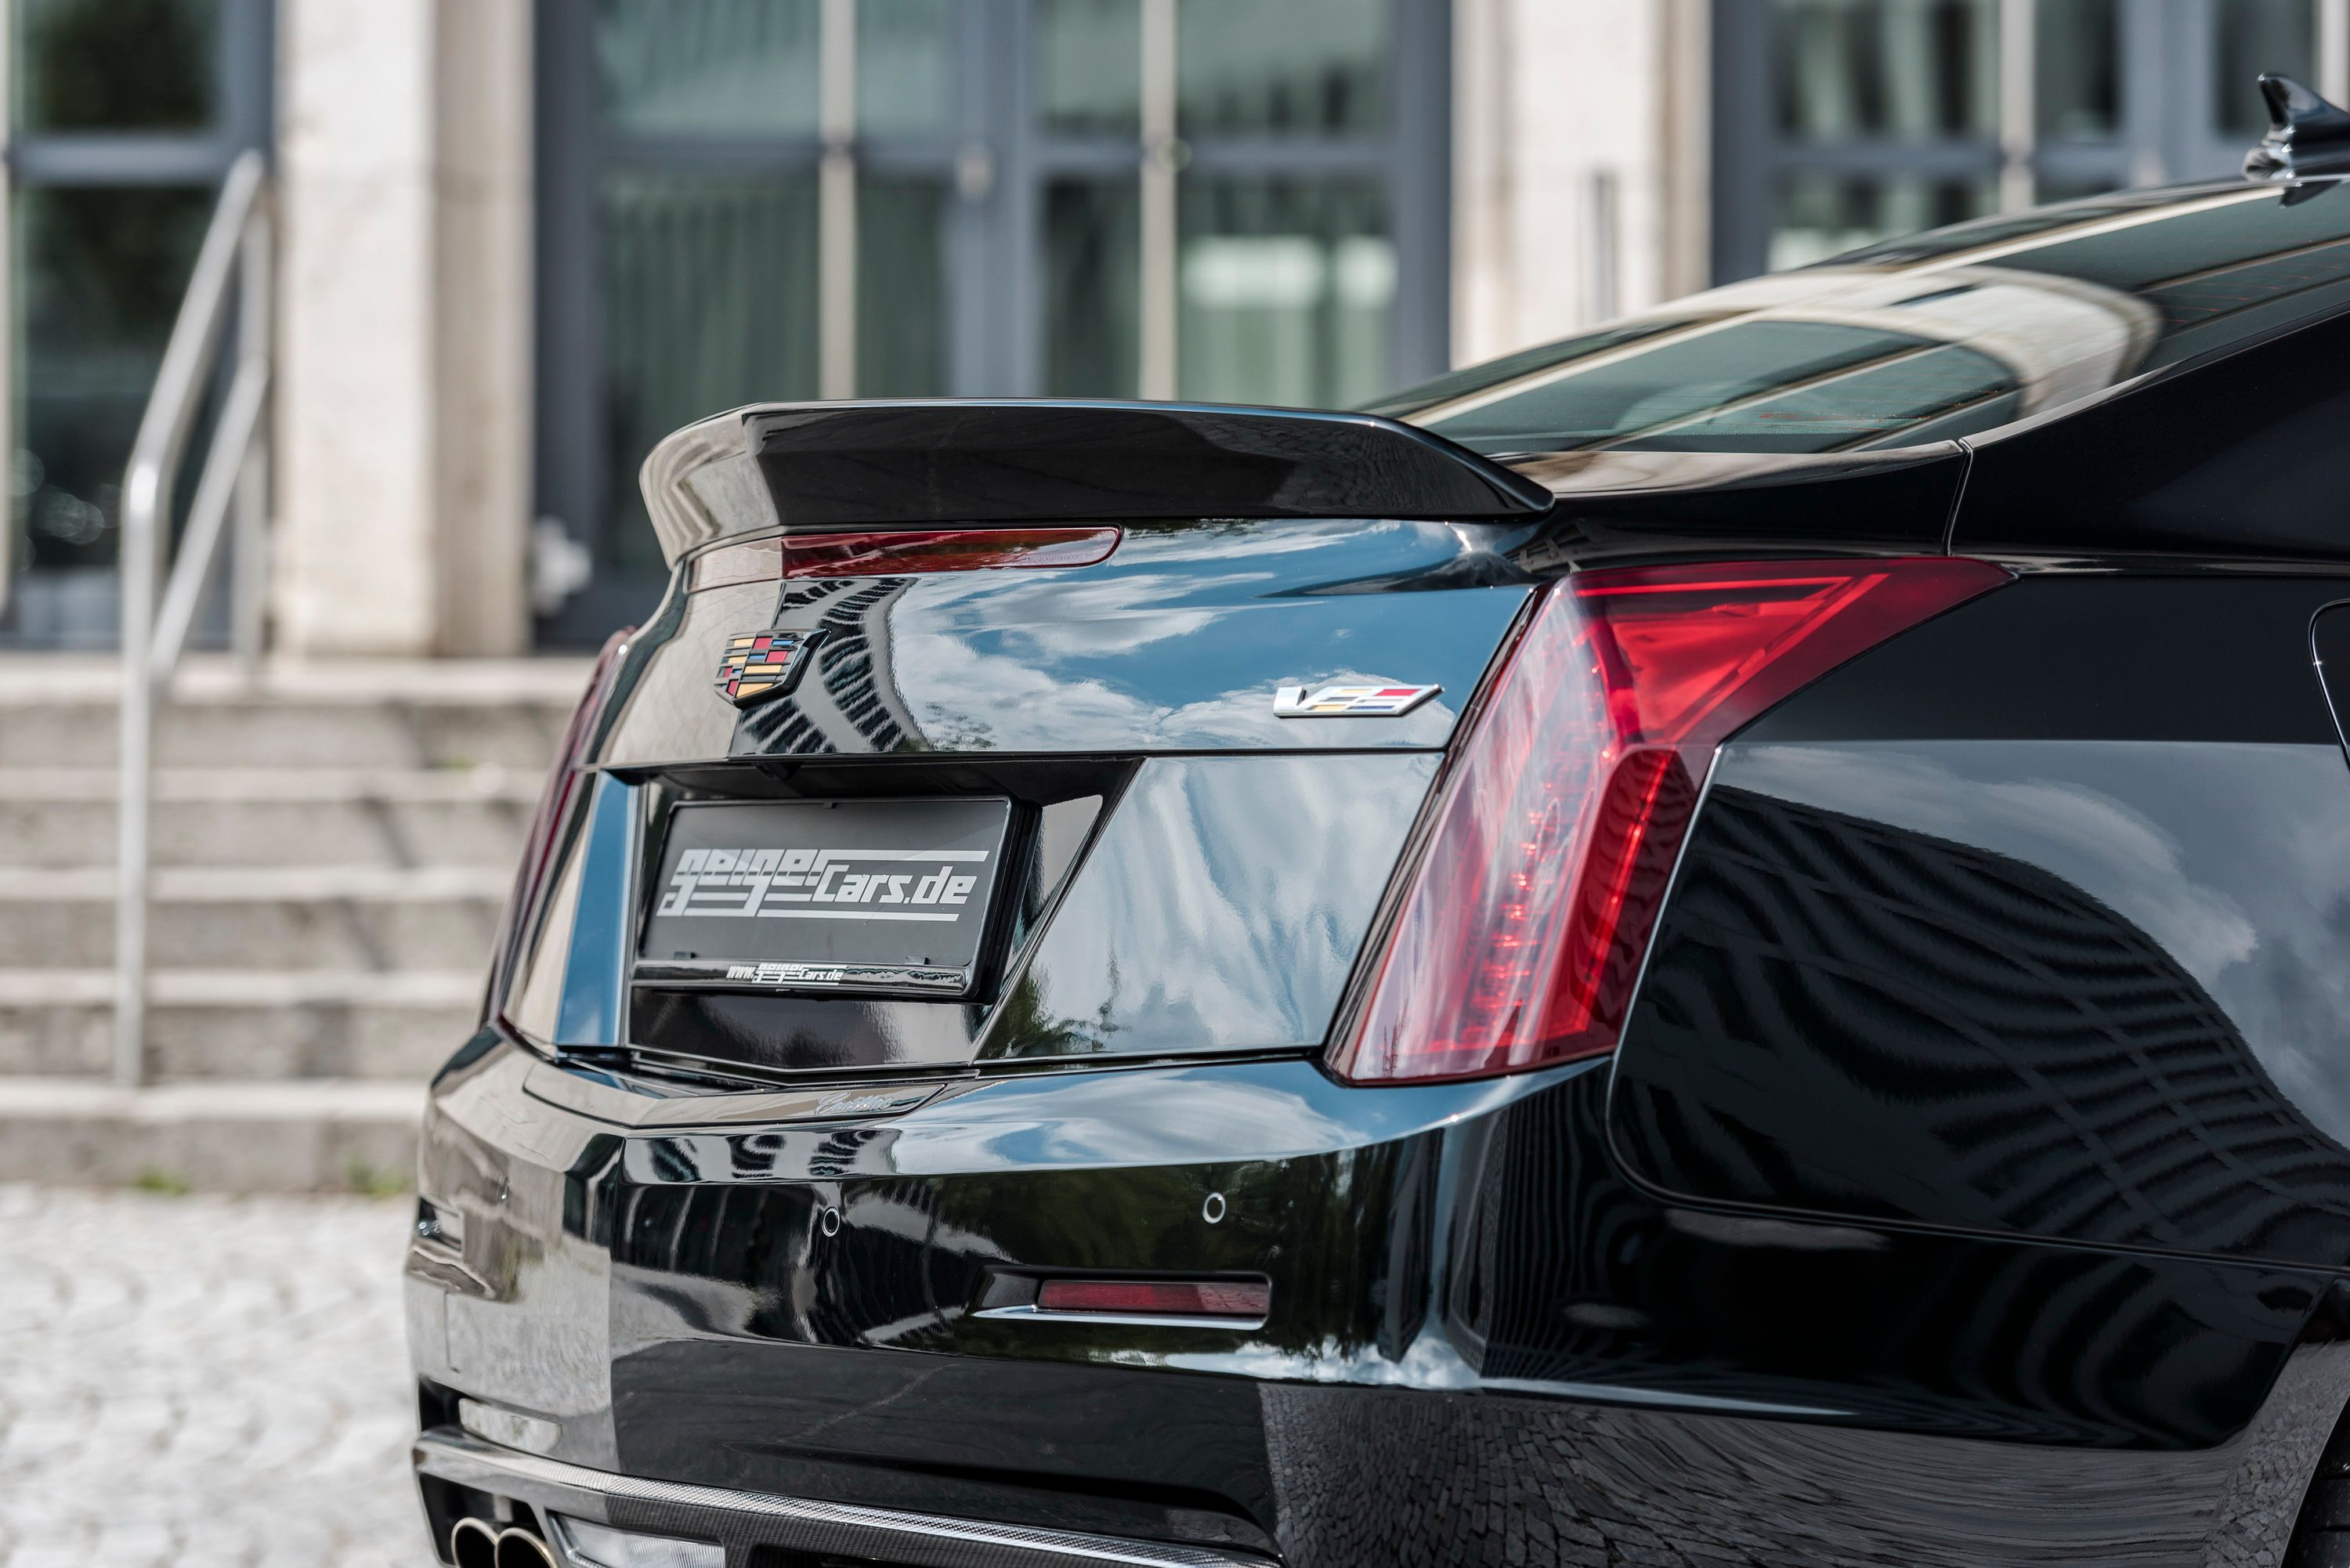 2016 Cadillac ATS-V Coupe Twin Turbo Black Line by Geiger Cars